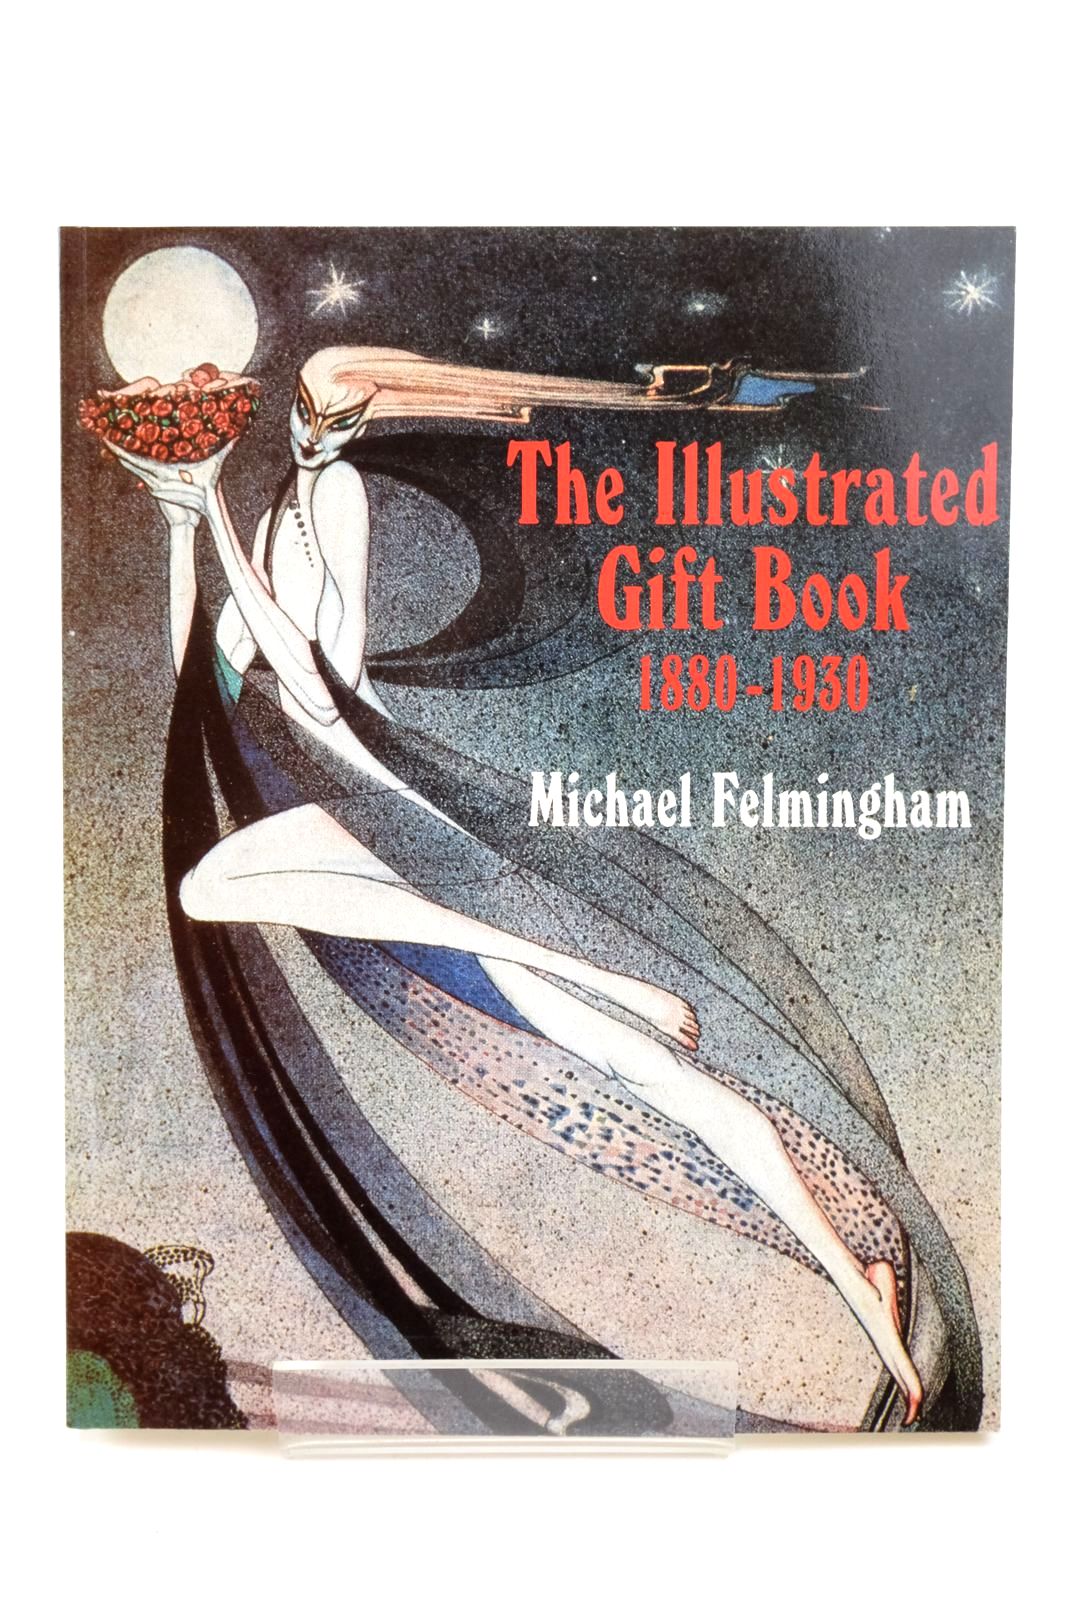 Photo of THE ILLUSTRATED GIFT BOOK 1880-1930- Stock Number: 2138629